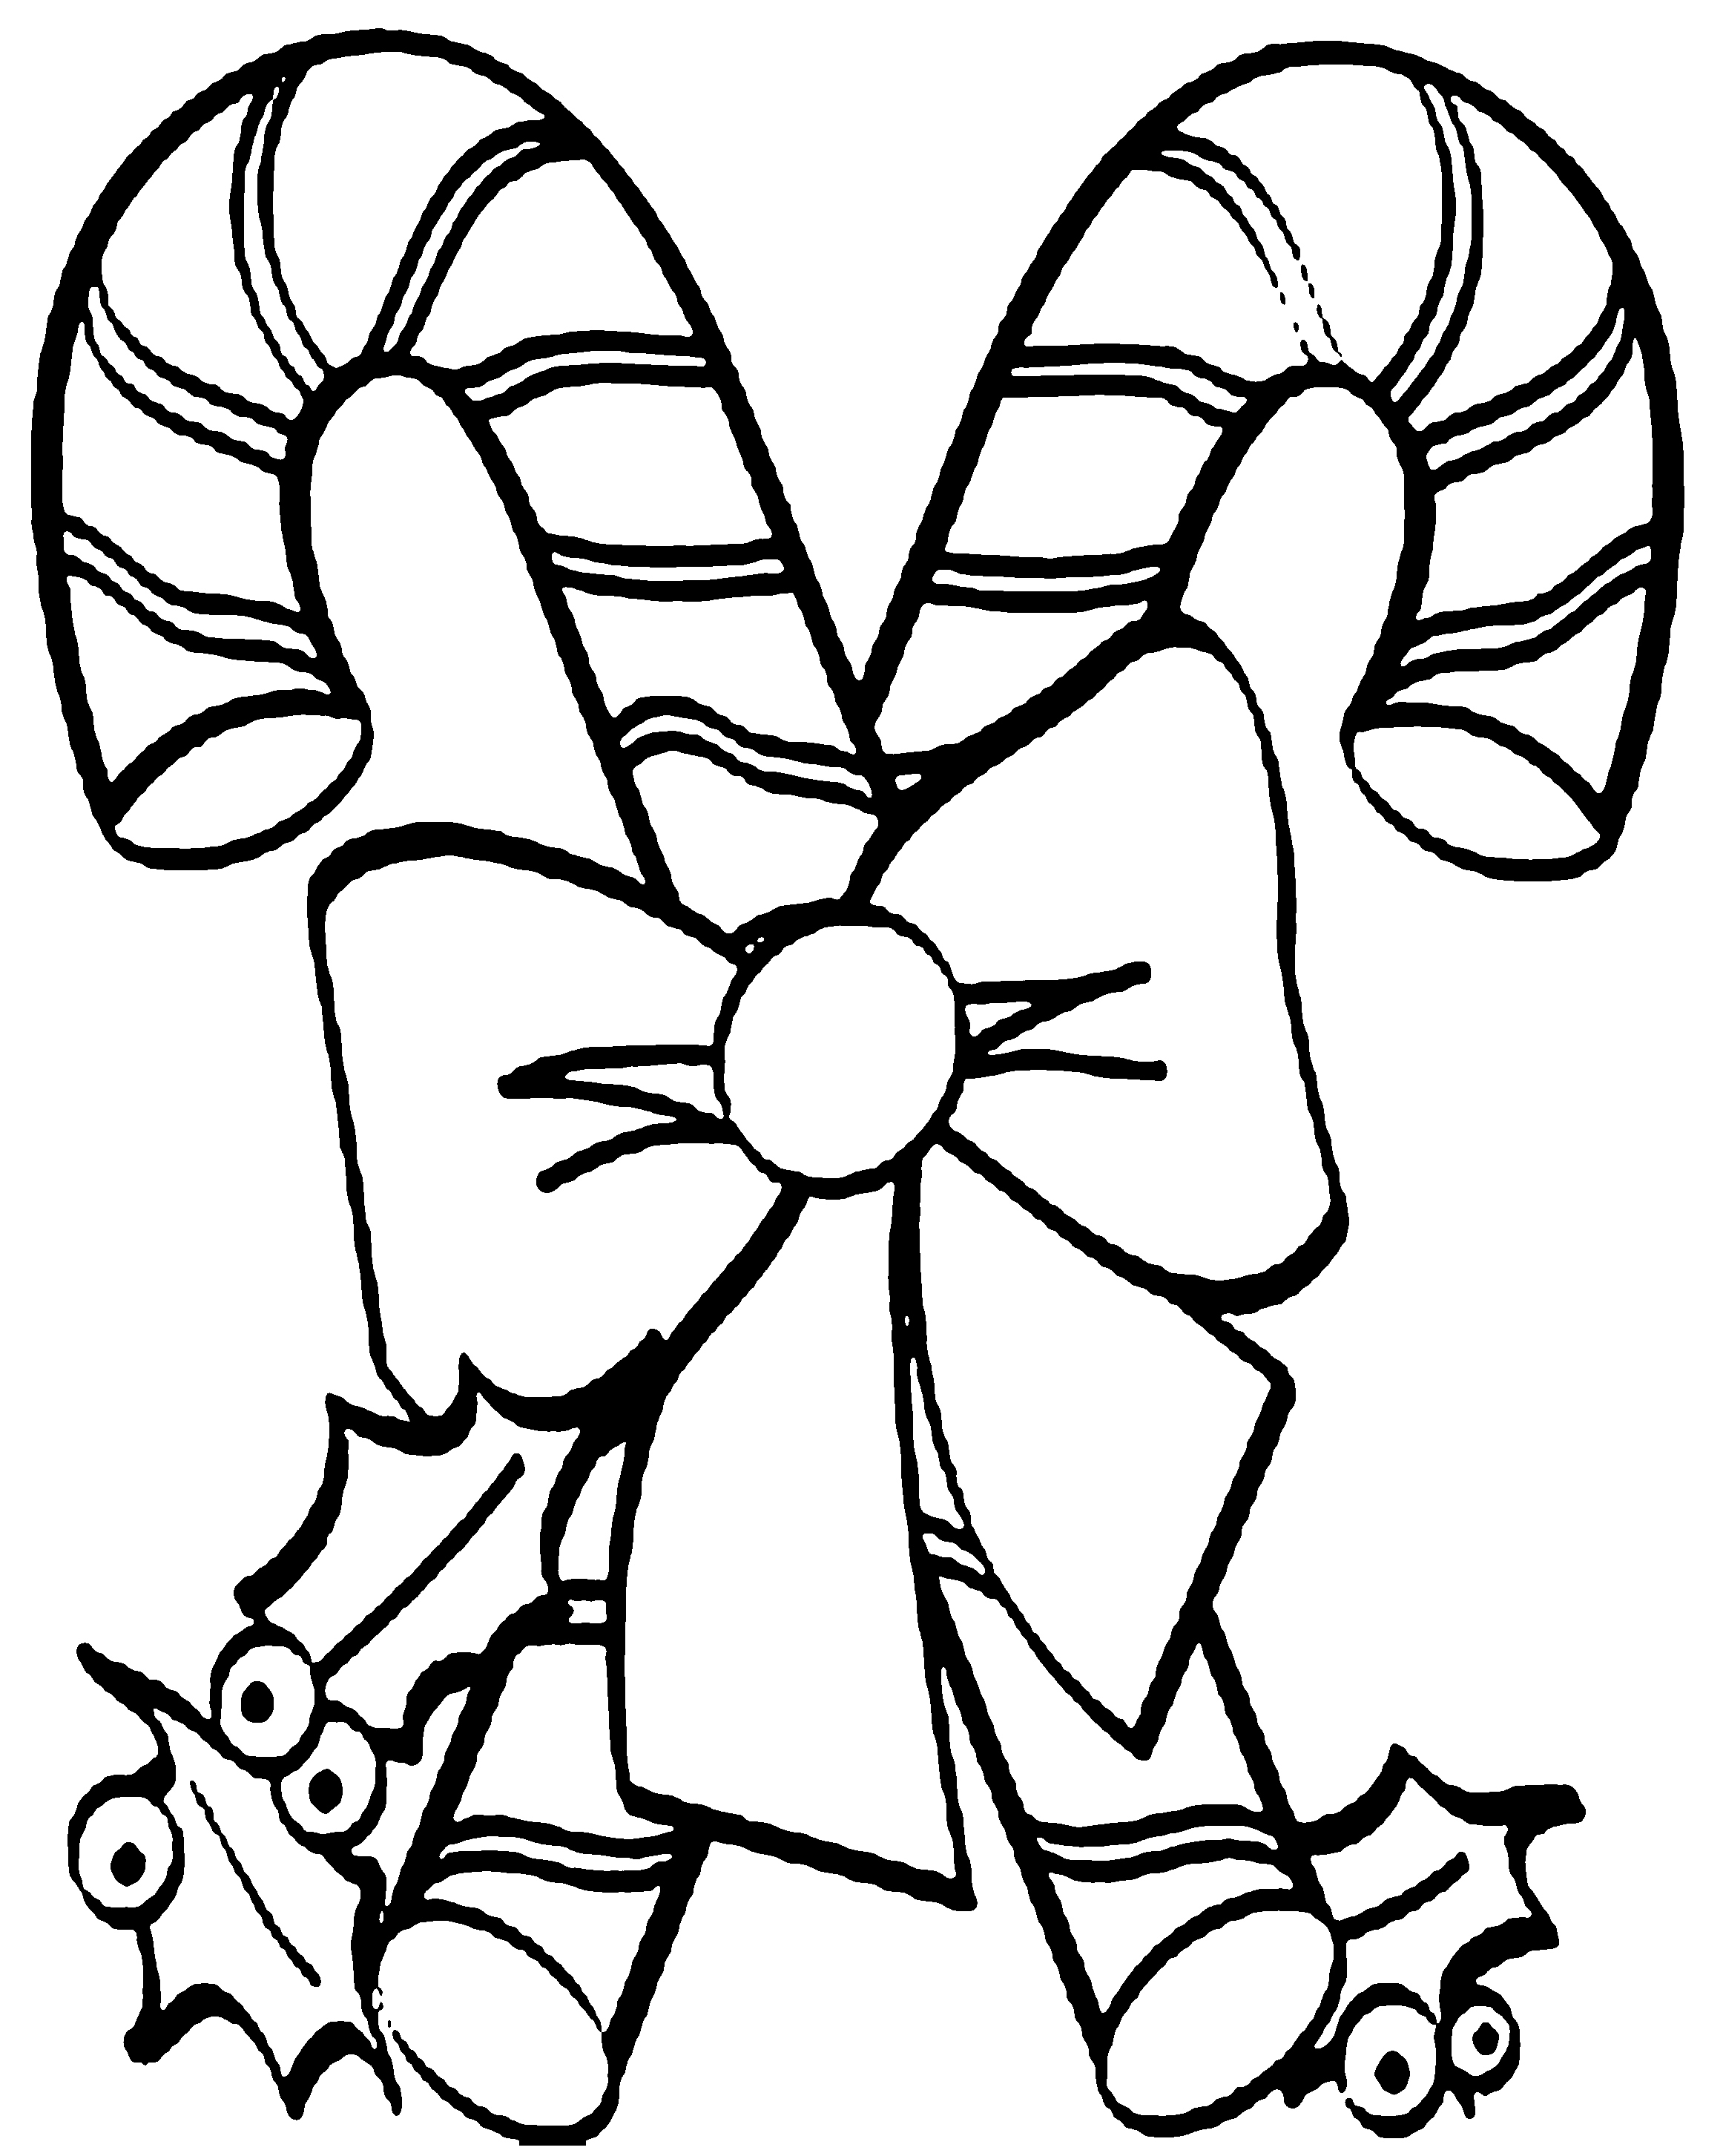 candy-cane-page-preschool-coloring-pages